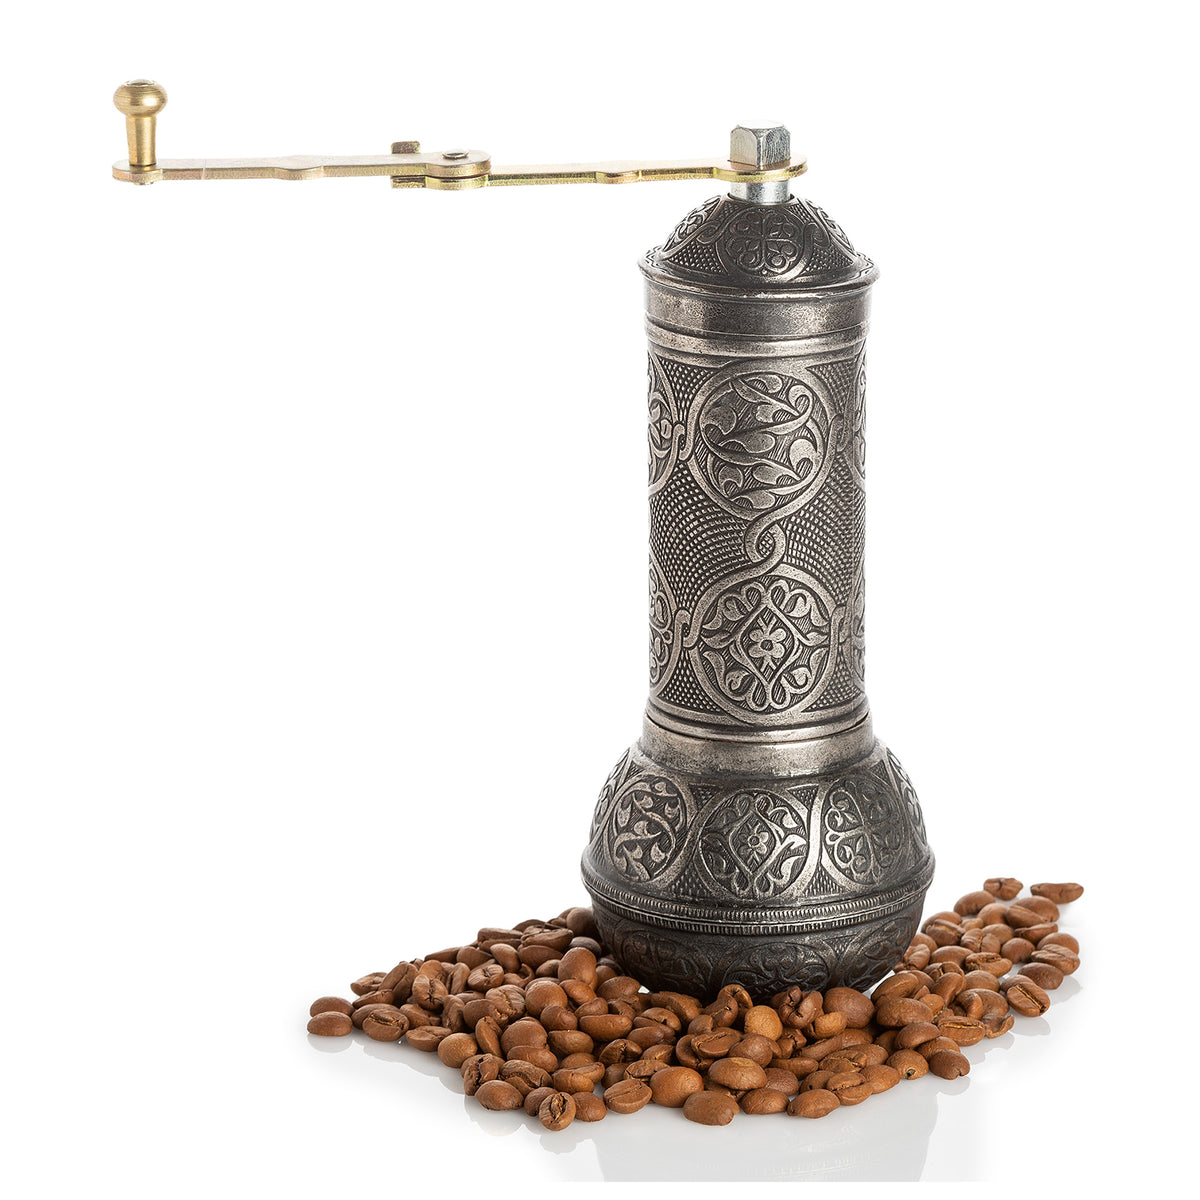 Crystalia Coffee Grinder, Refillable Turkish Style Mill with Adjustable  Grinder, Manual Coffee Mill with Handle, Antique Grinder Metal with Hand  Crank, Adjustable Coarseness (Antique Copper) 